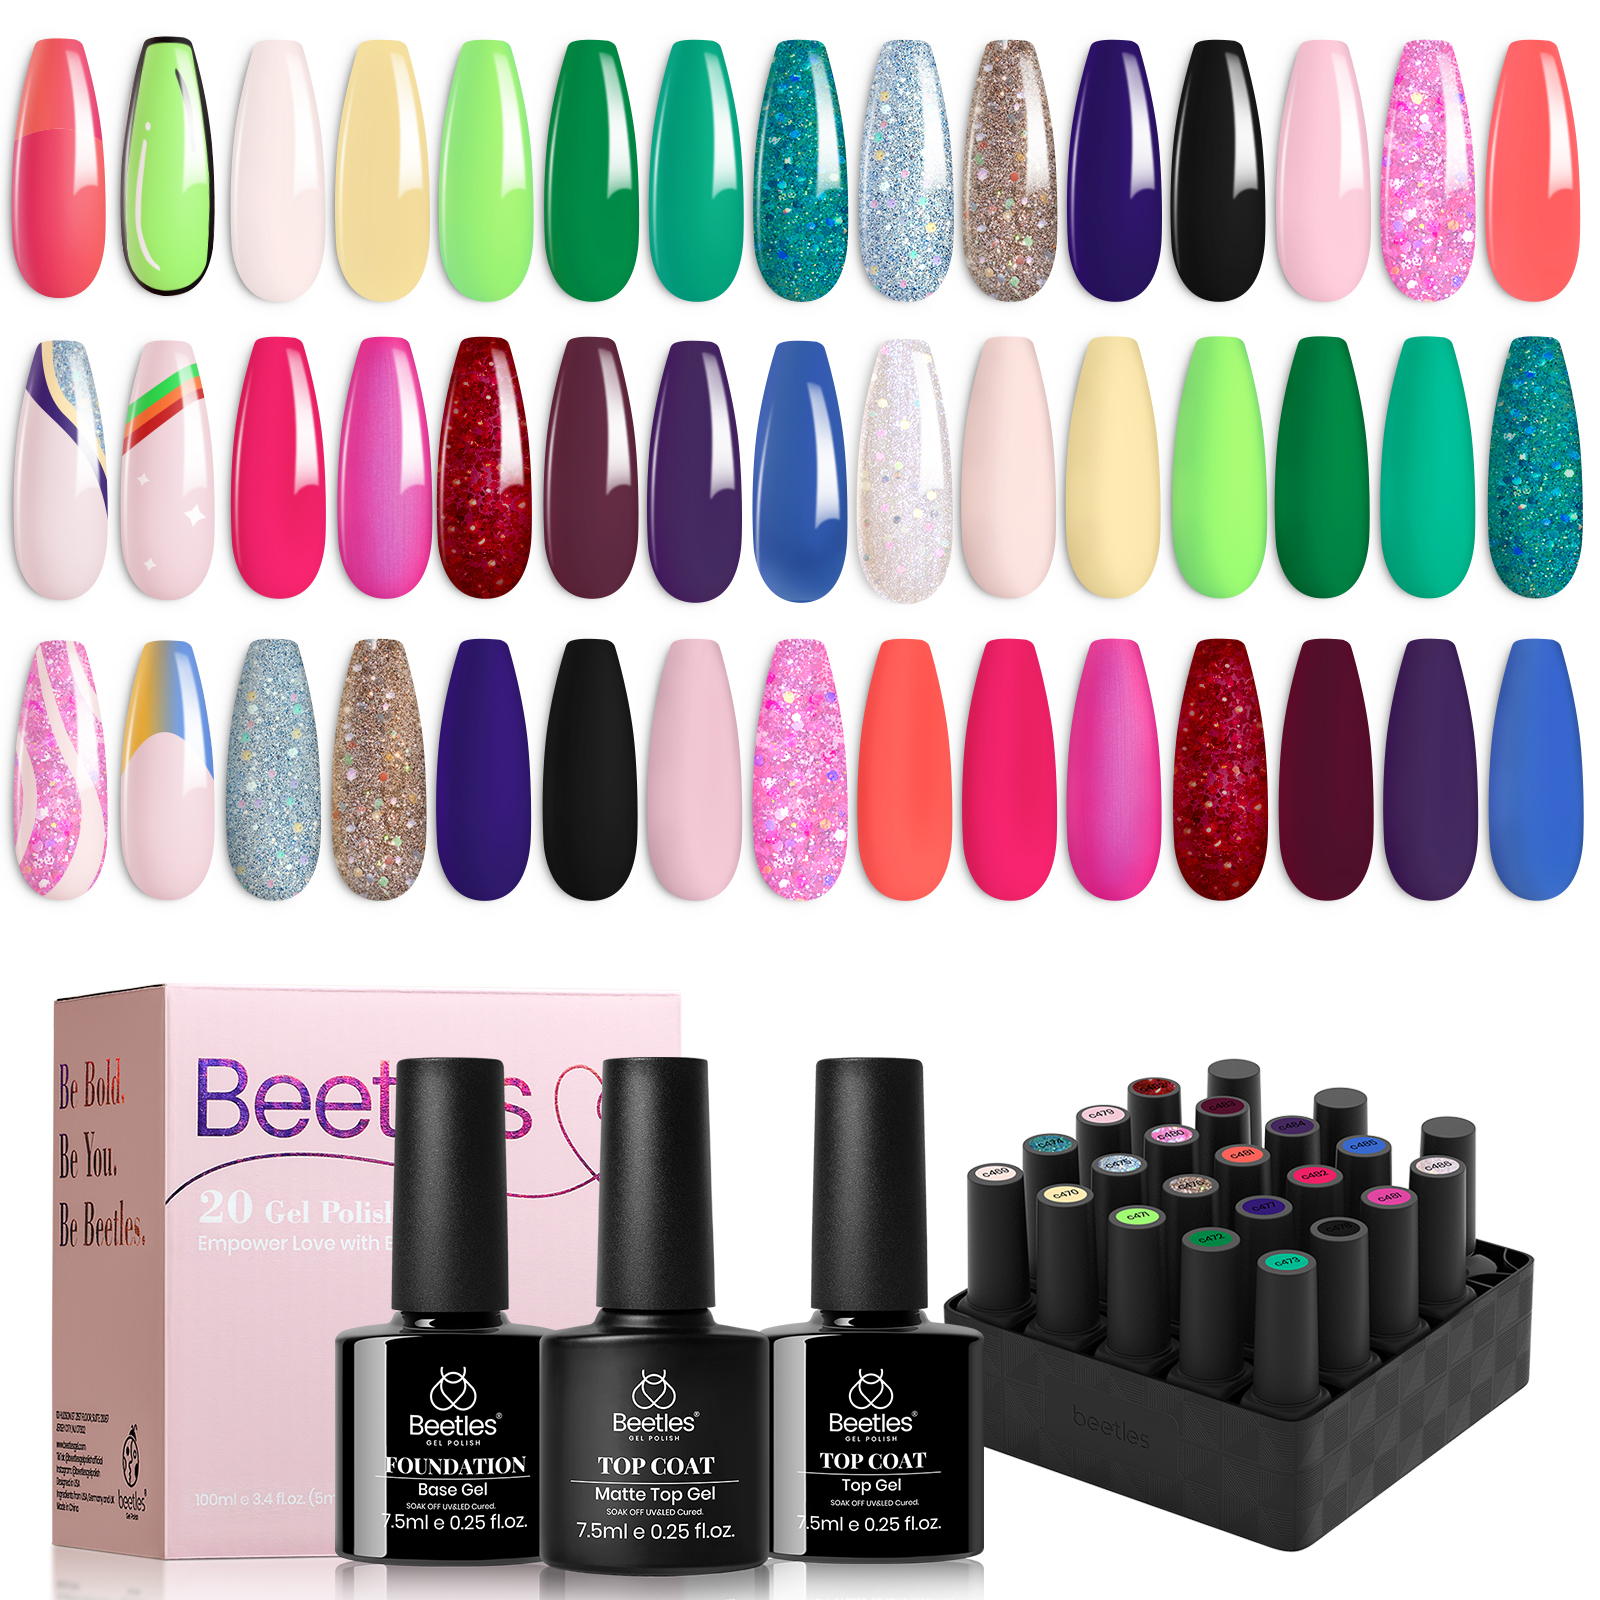 beetles Gel Polish Nail Set 20 Colors Modern Muse Collection Nude Gray Pink  Blue Glitter Manicure Starter Kit with 3 Pcs Base Ma